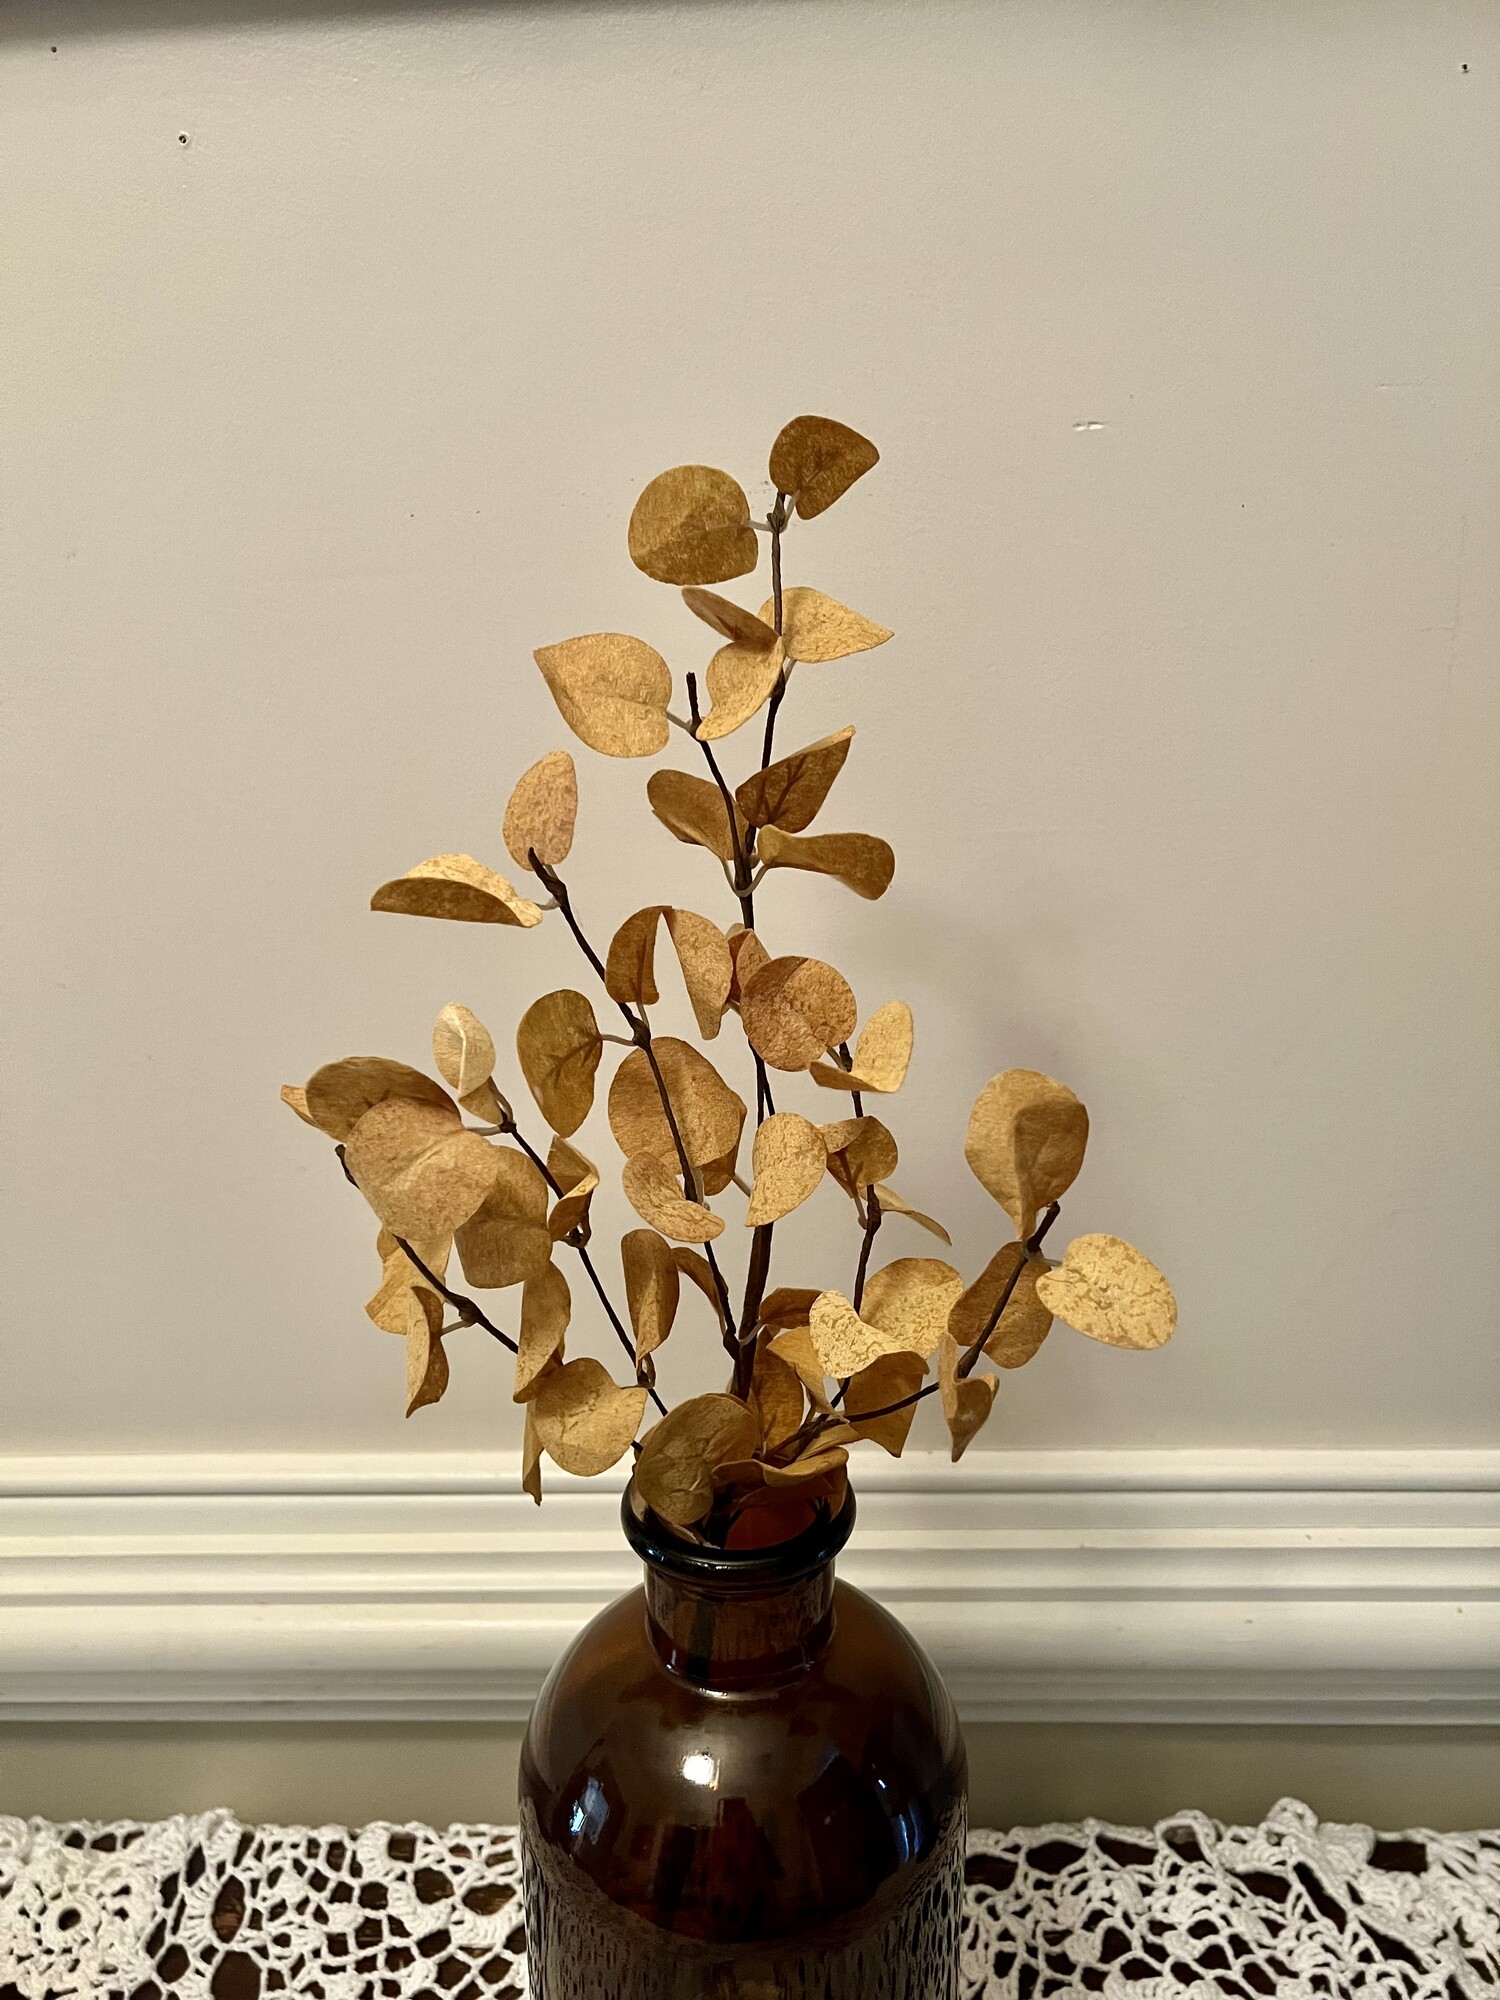 The Mustard Penny Leaf Pick  has fabric leaves and a beautiful deep mustard hue ideal for adding a touch of fall to any space. Pair this pick with cotton, hops or millet for a harvest centerpiece.  Measures 18 inches high and 4 inches wide